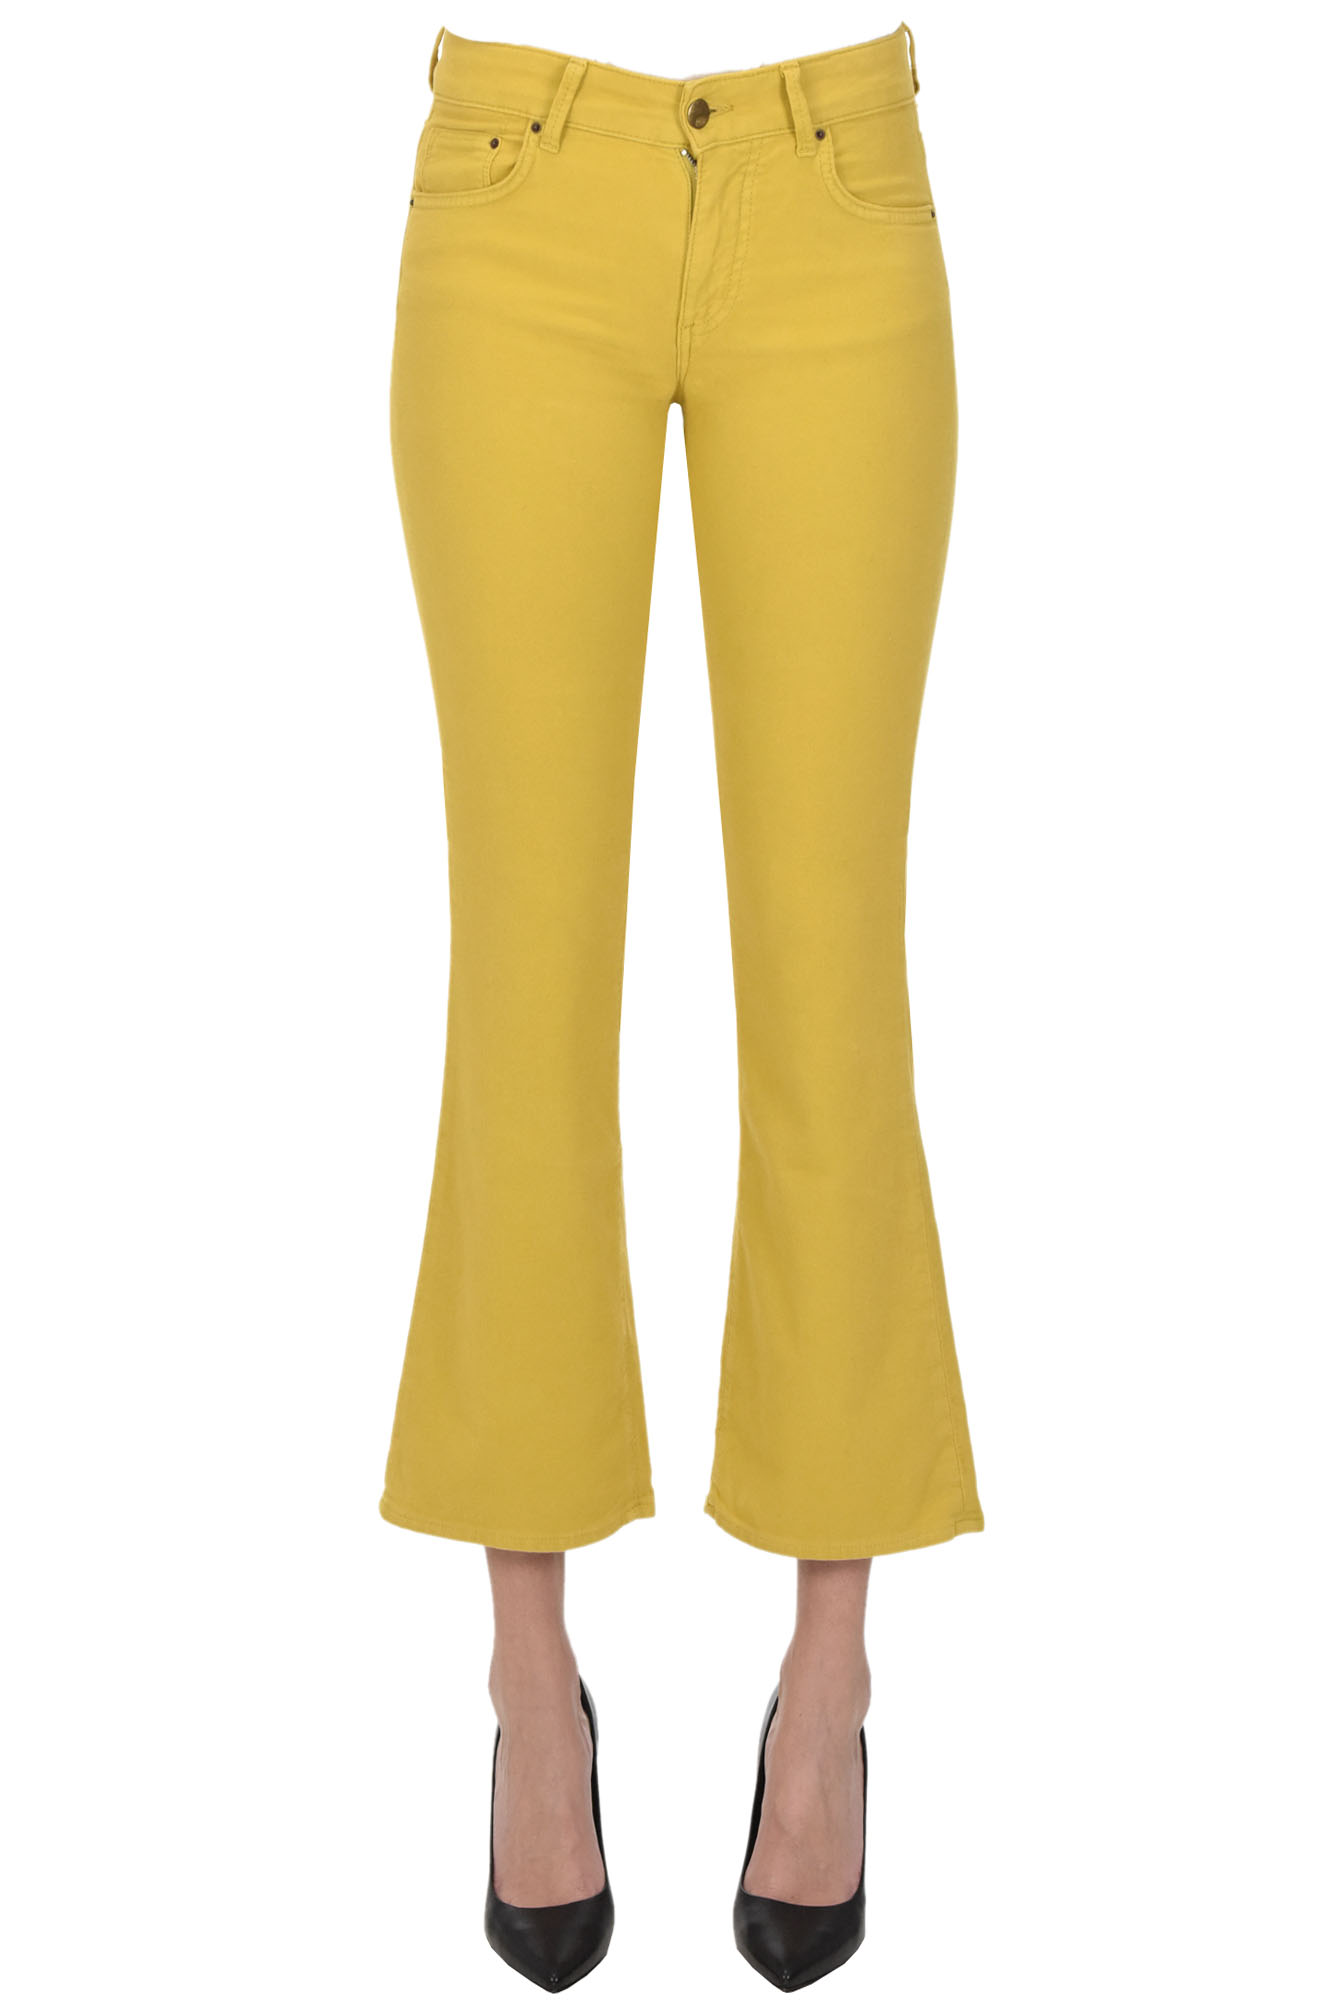 Ps. Don't Forget Me Velvet 5 Pockets Style Trousers In Mustard